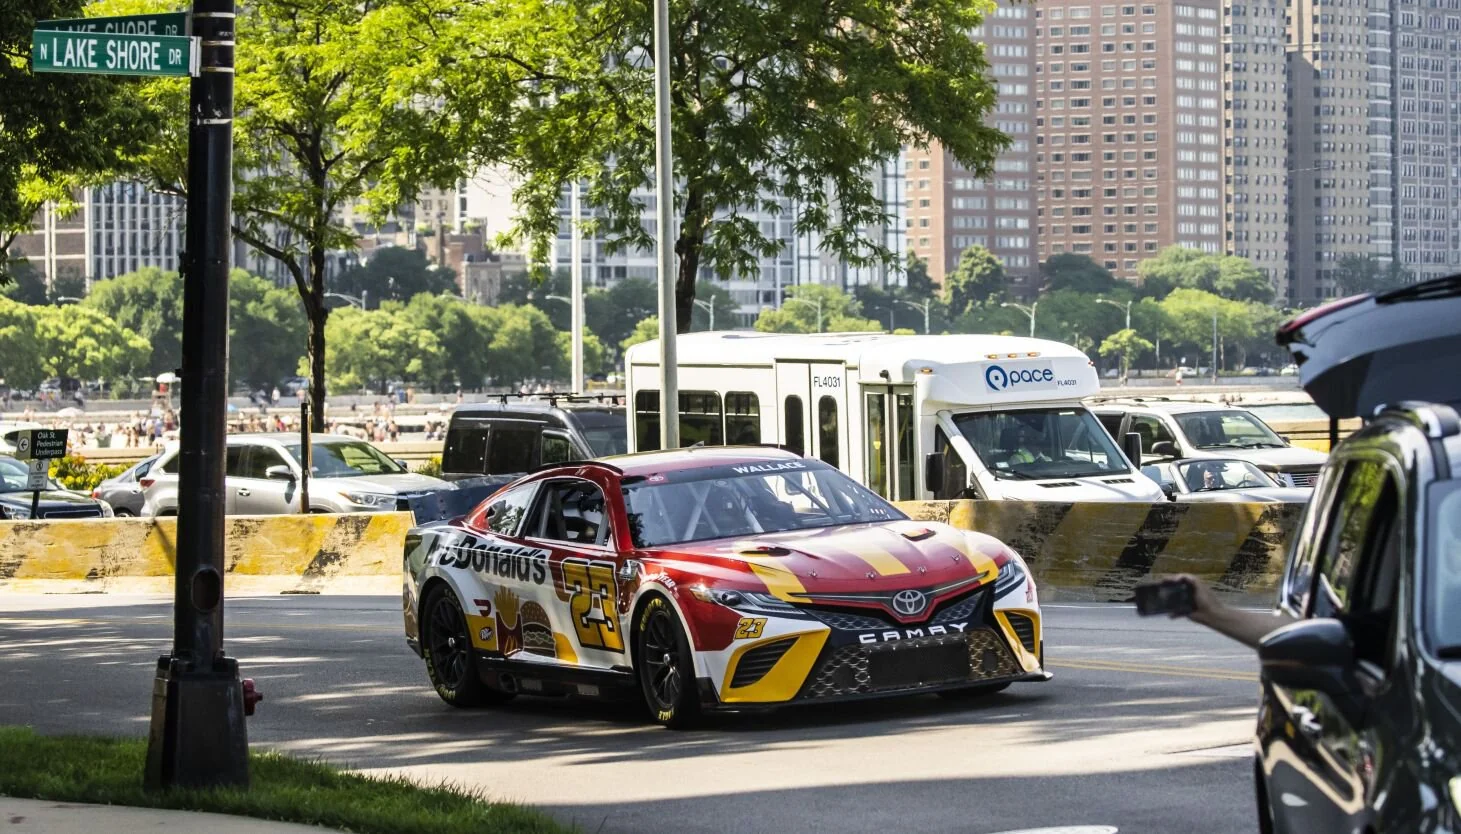 Chicago NASCAR Race to Have Reduced Road Closures This Summer